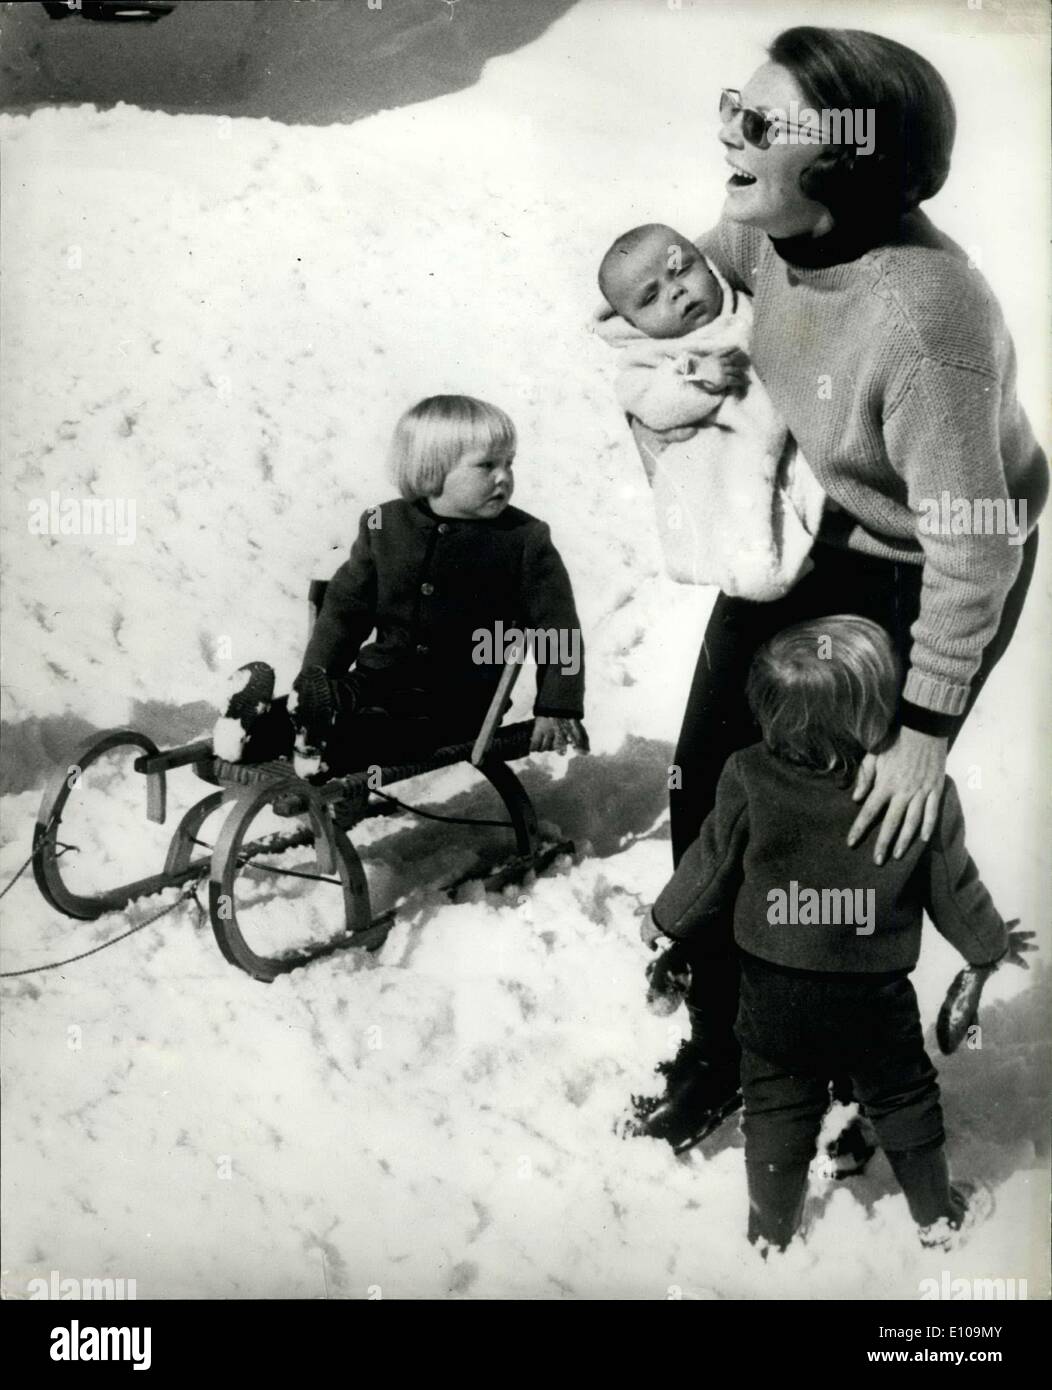 mar-16-1970-dutch-royals-on-holiday-in-the-snow-crown-princess-beatrix-E109MY.jpg